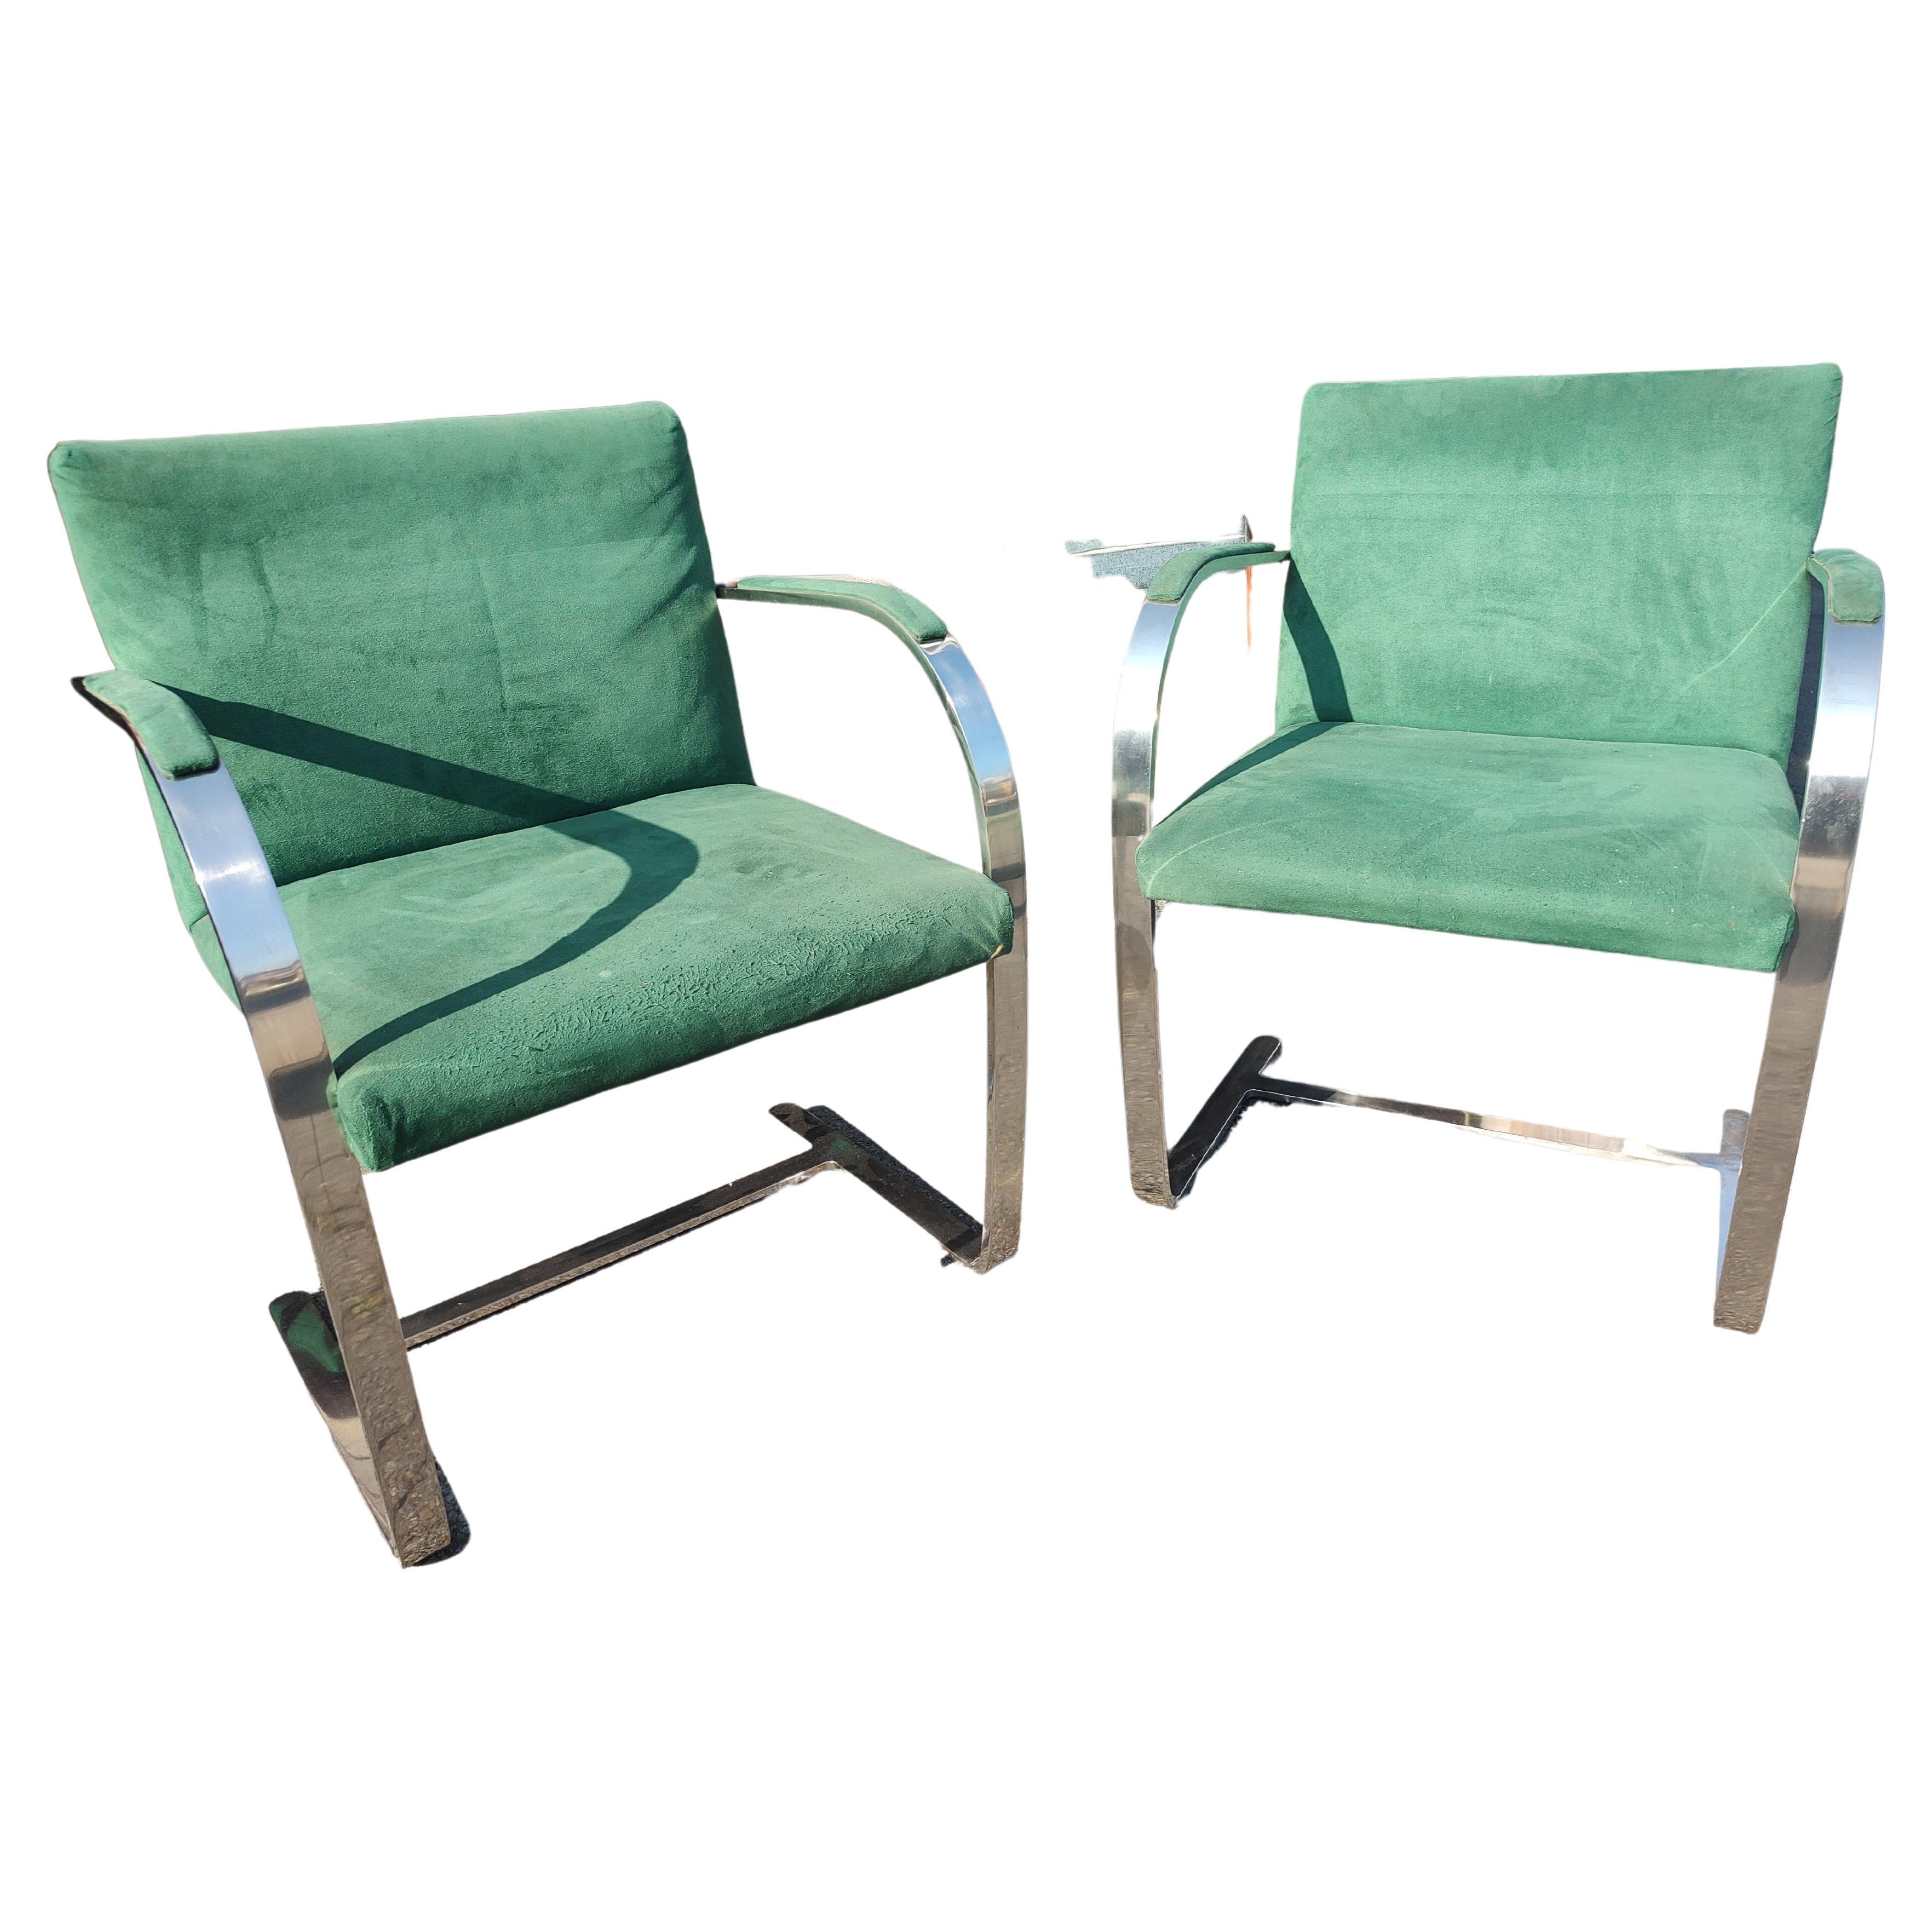 Pair of Mid Century Modern Bauhaus Styled Brno Chairs  Ludwig Mies van DerRohe  In Good Condition For Sale In Port Jervis, NY